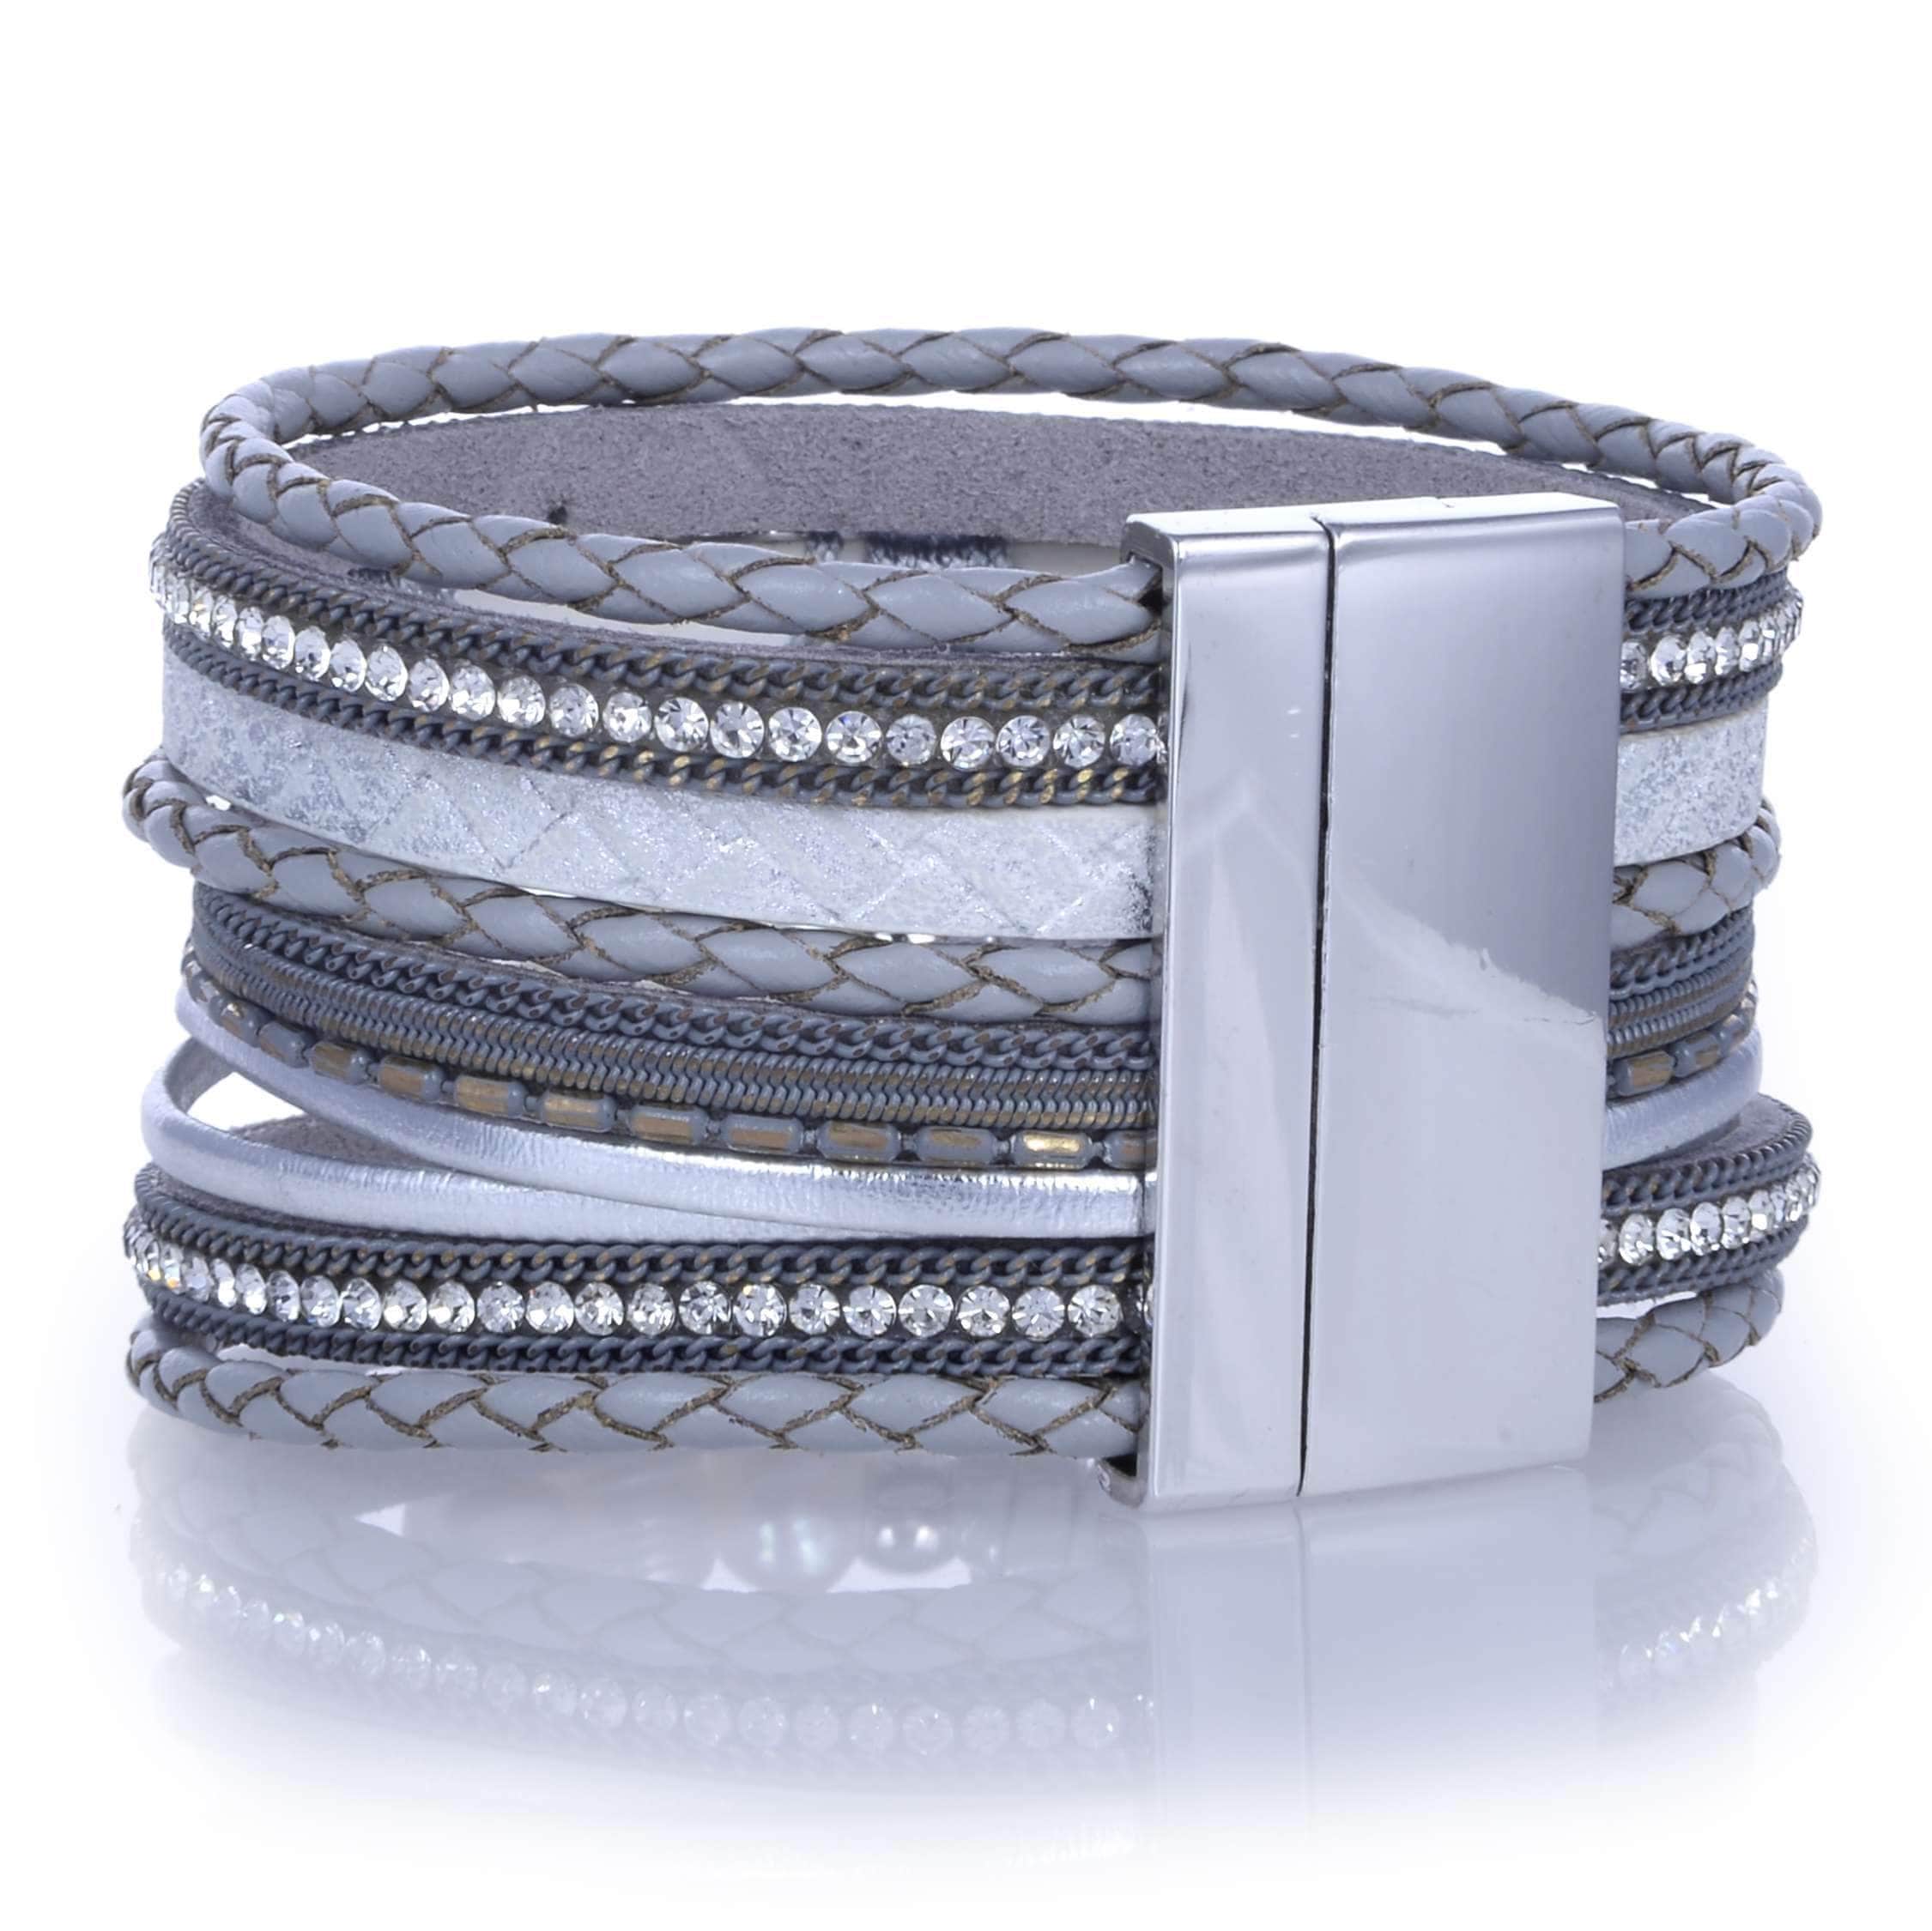 Kalifano Multiwrap Bracelets Multiple Strand Bracelet with Tree of Life Design Dark Gray With Magnetic Clasp BMW-01-GY2